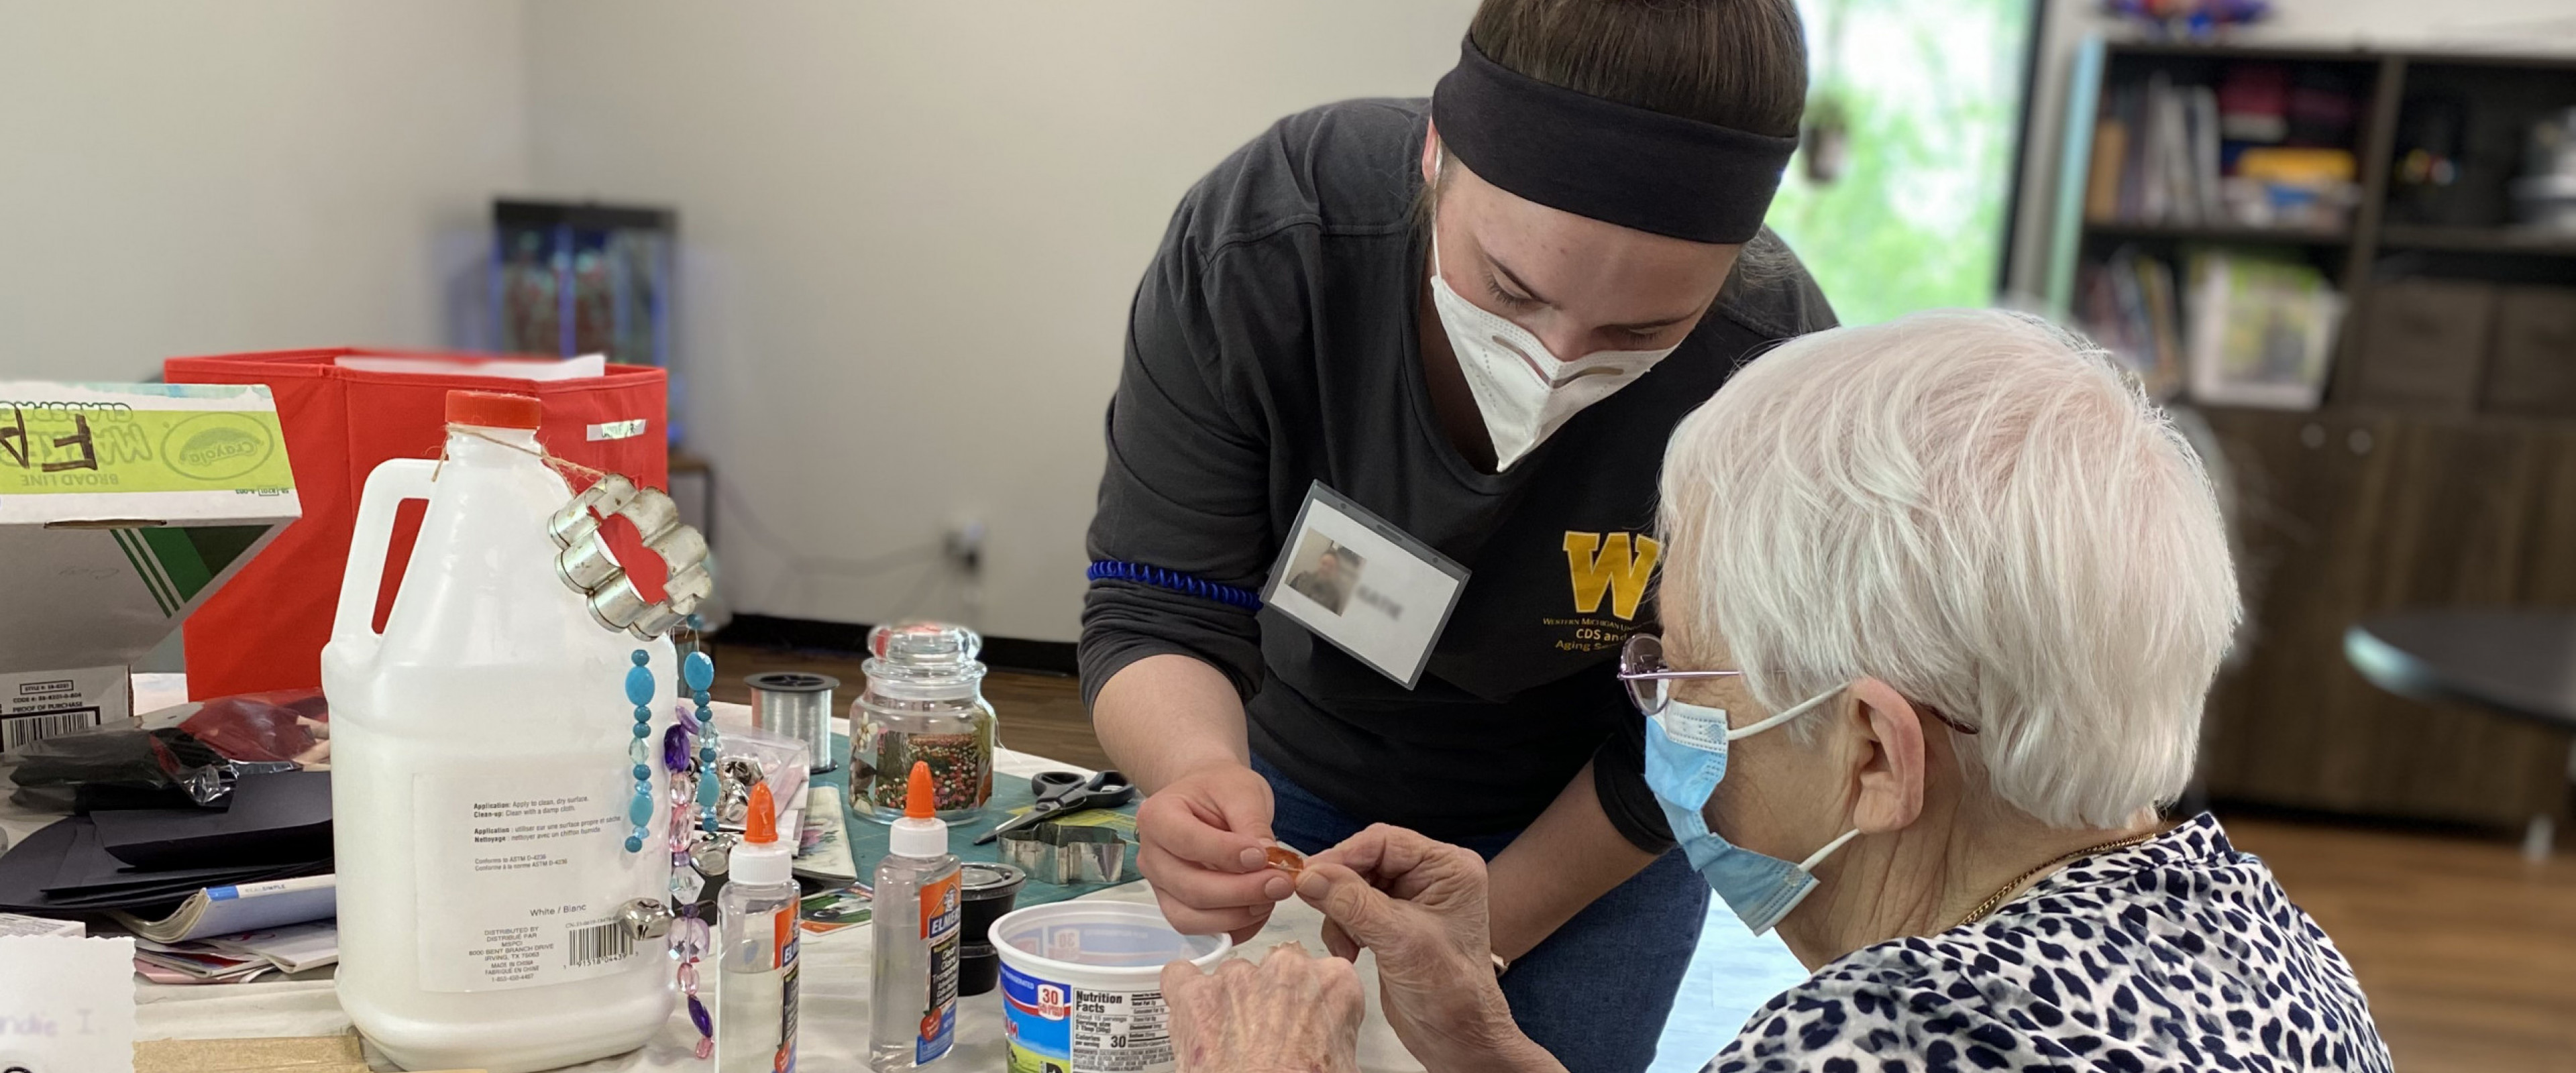 Staff member works on a craft with an older woman